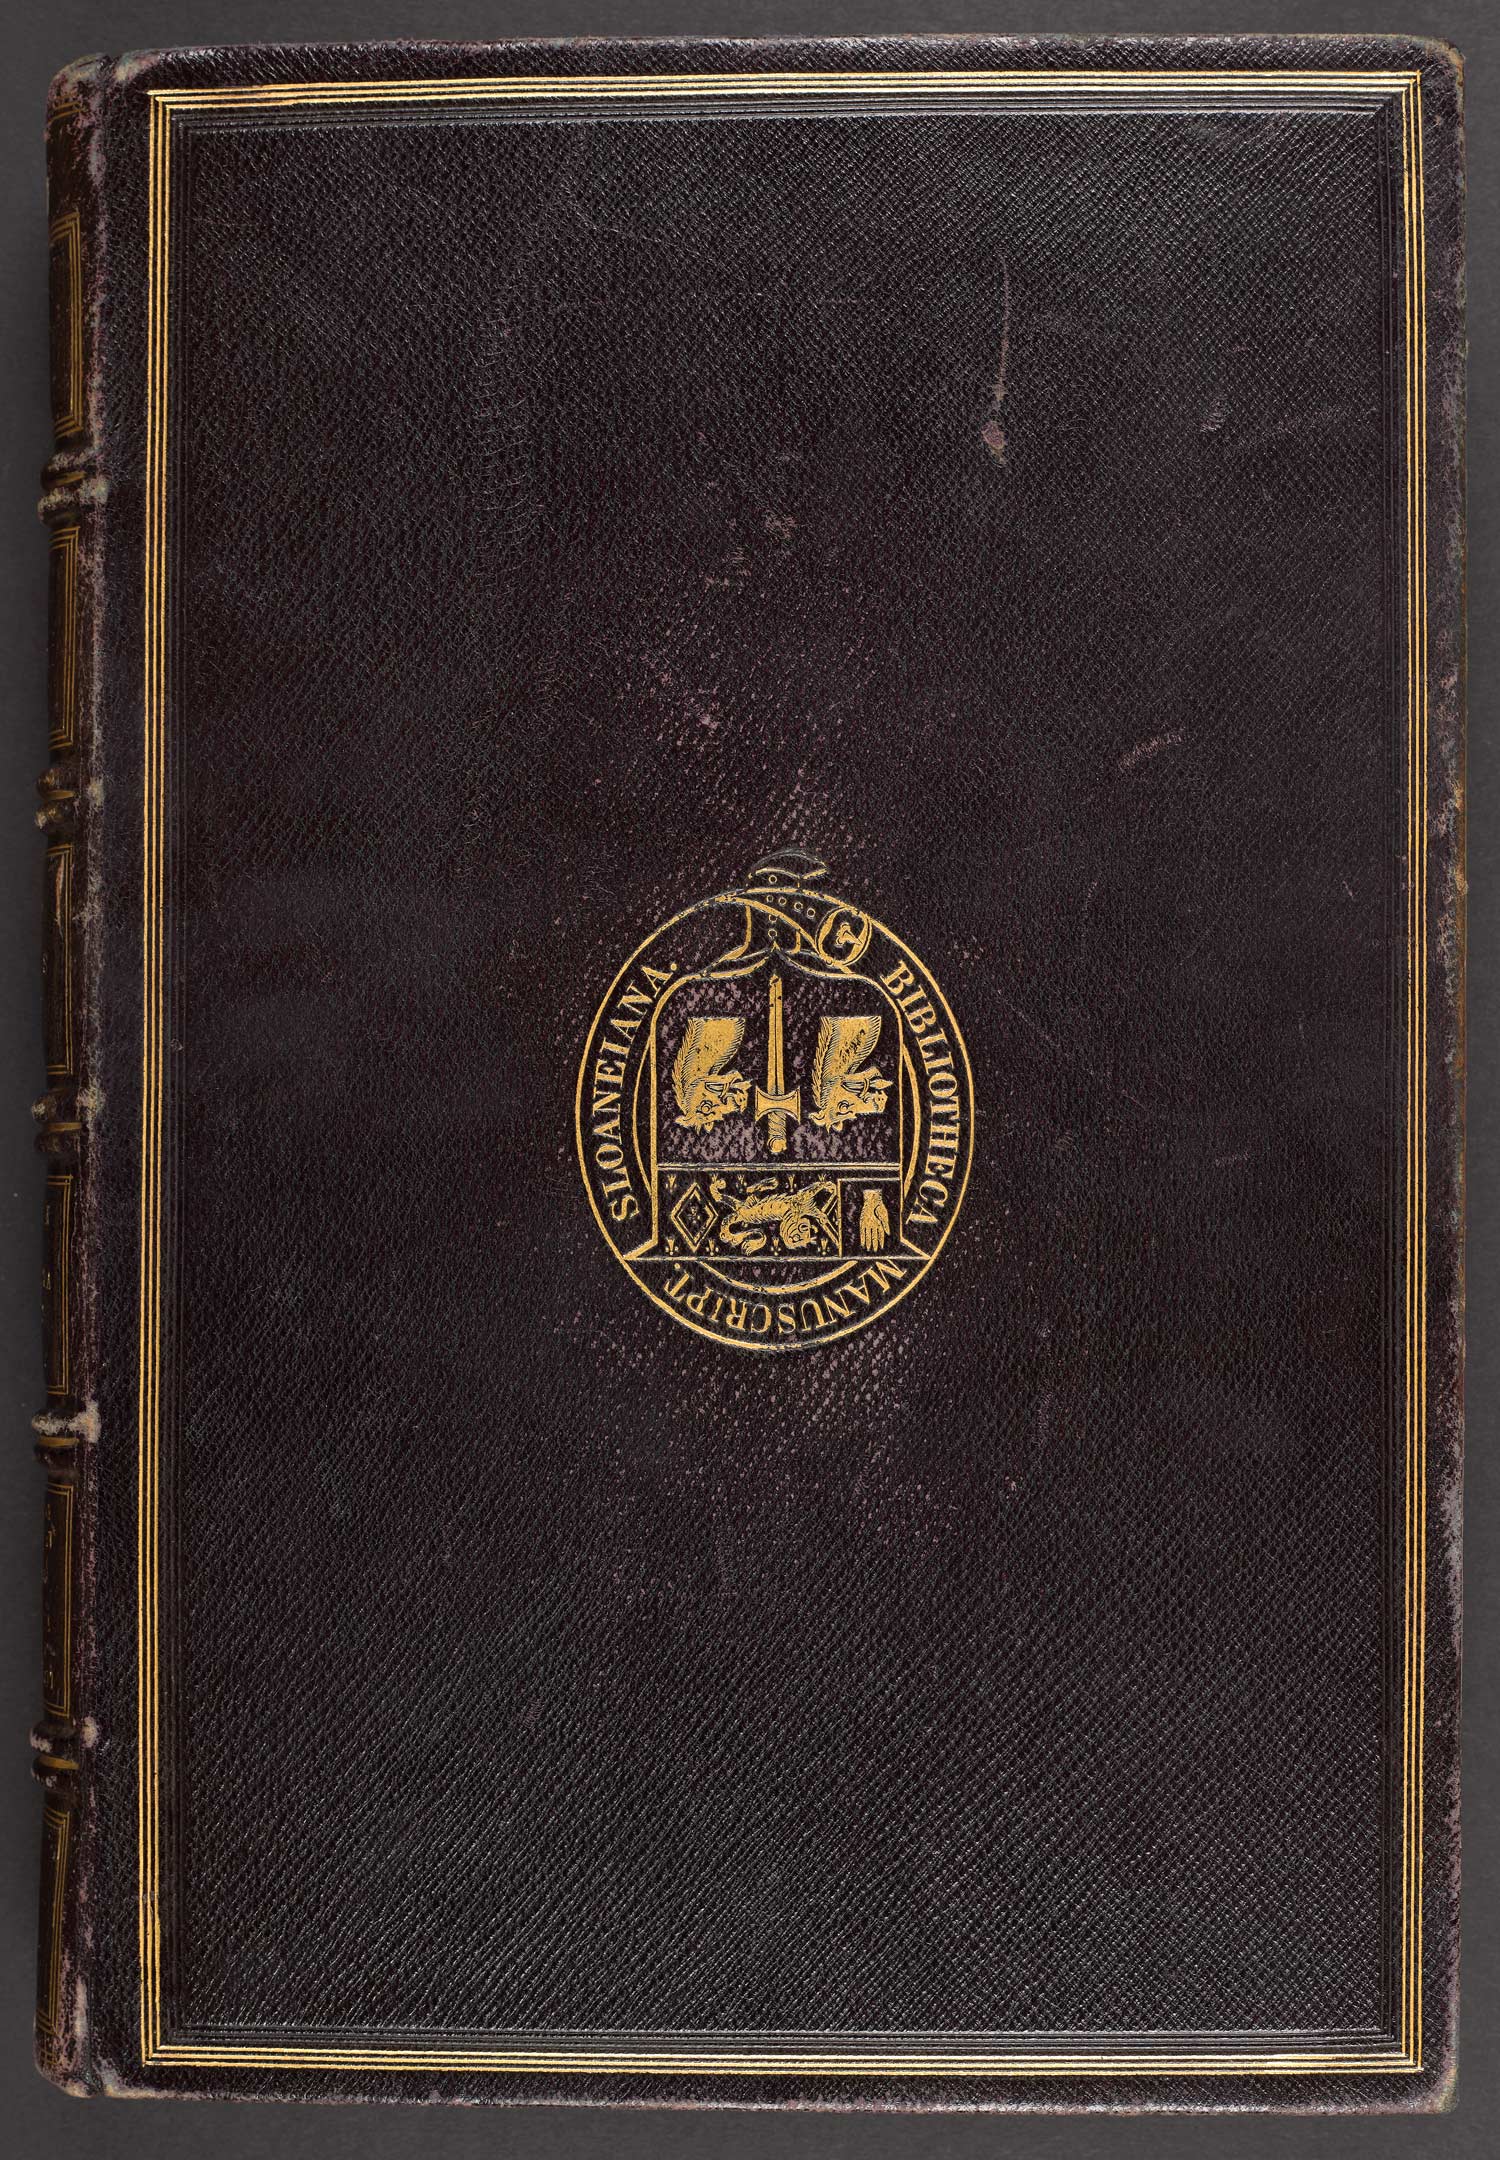 Facsimile edition About Plants and Animals with gold embossed black leather binding.